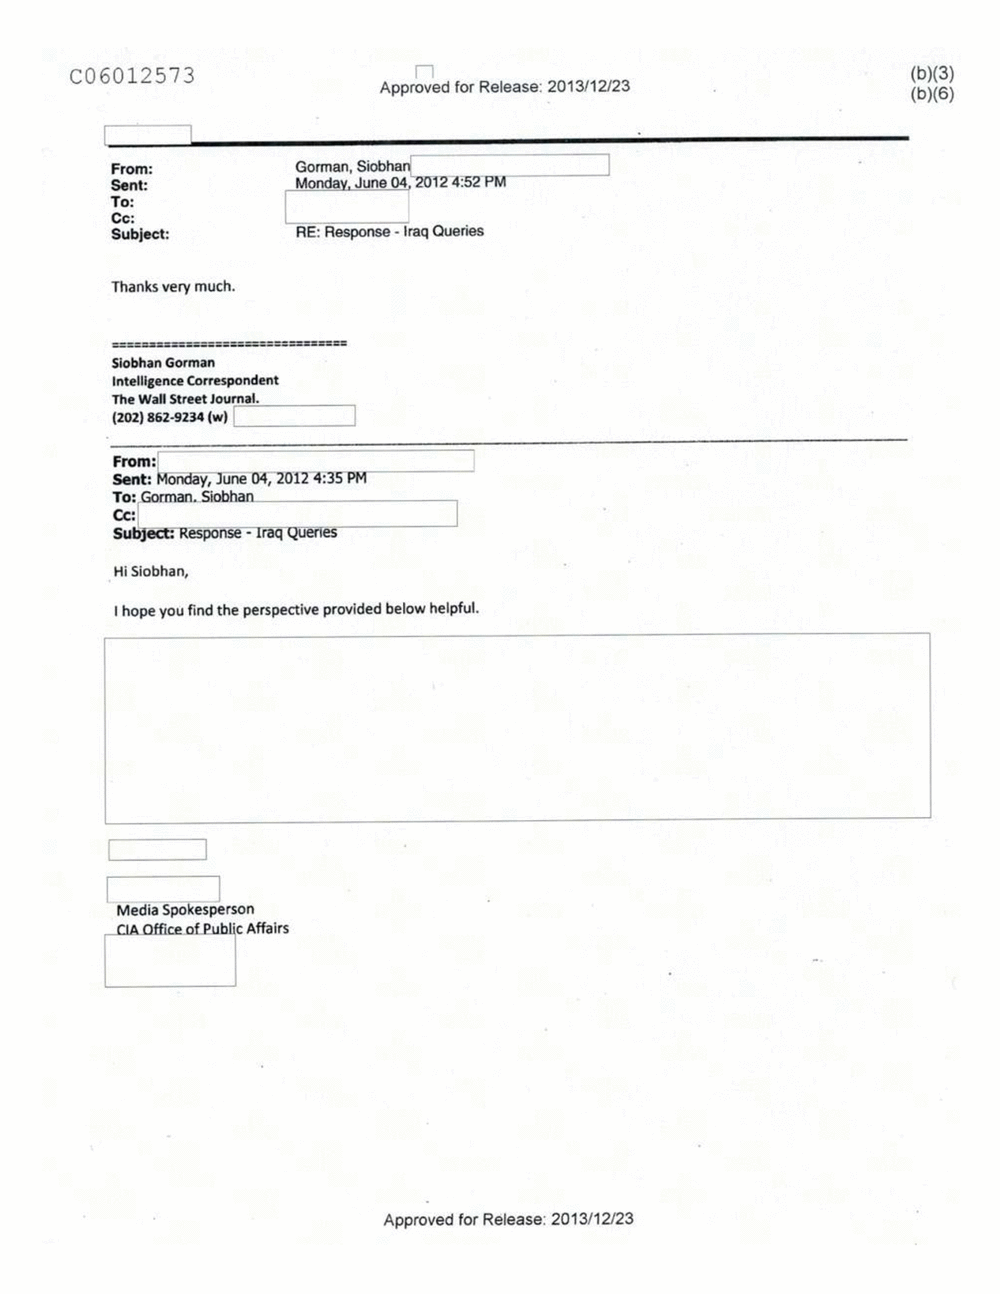 Page 108 from Email Correspondence Between Reporters and CIA Flacks